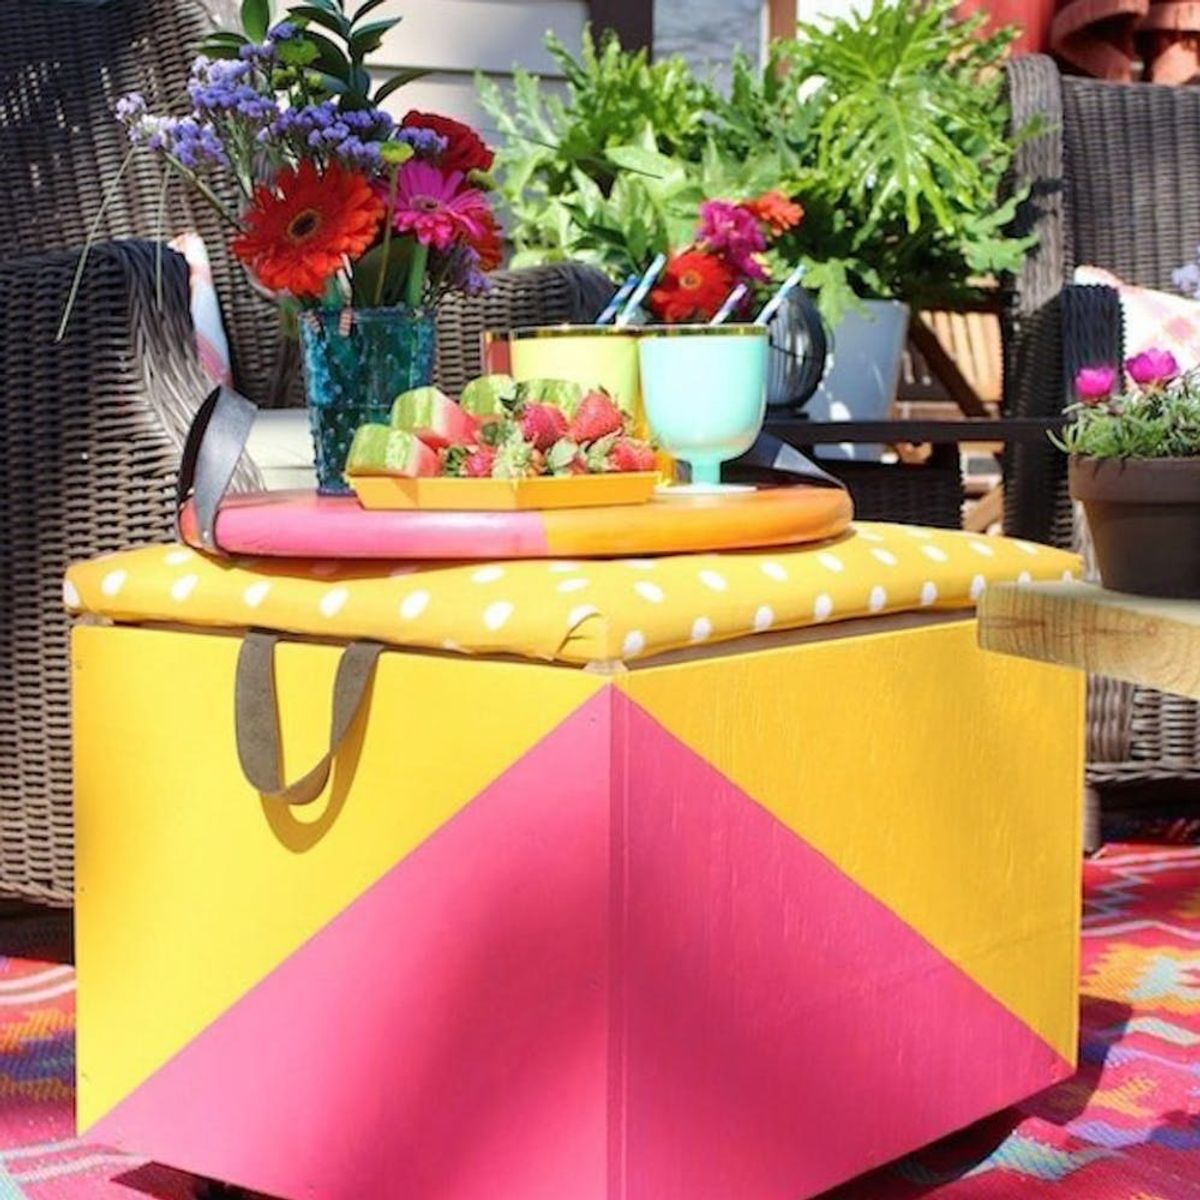 12 Organization Hacks Perfect for the Patio